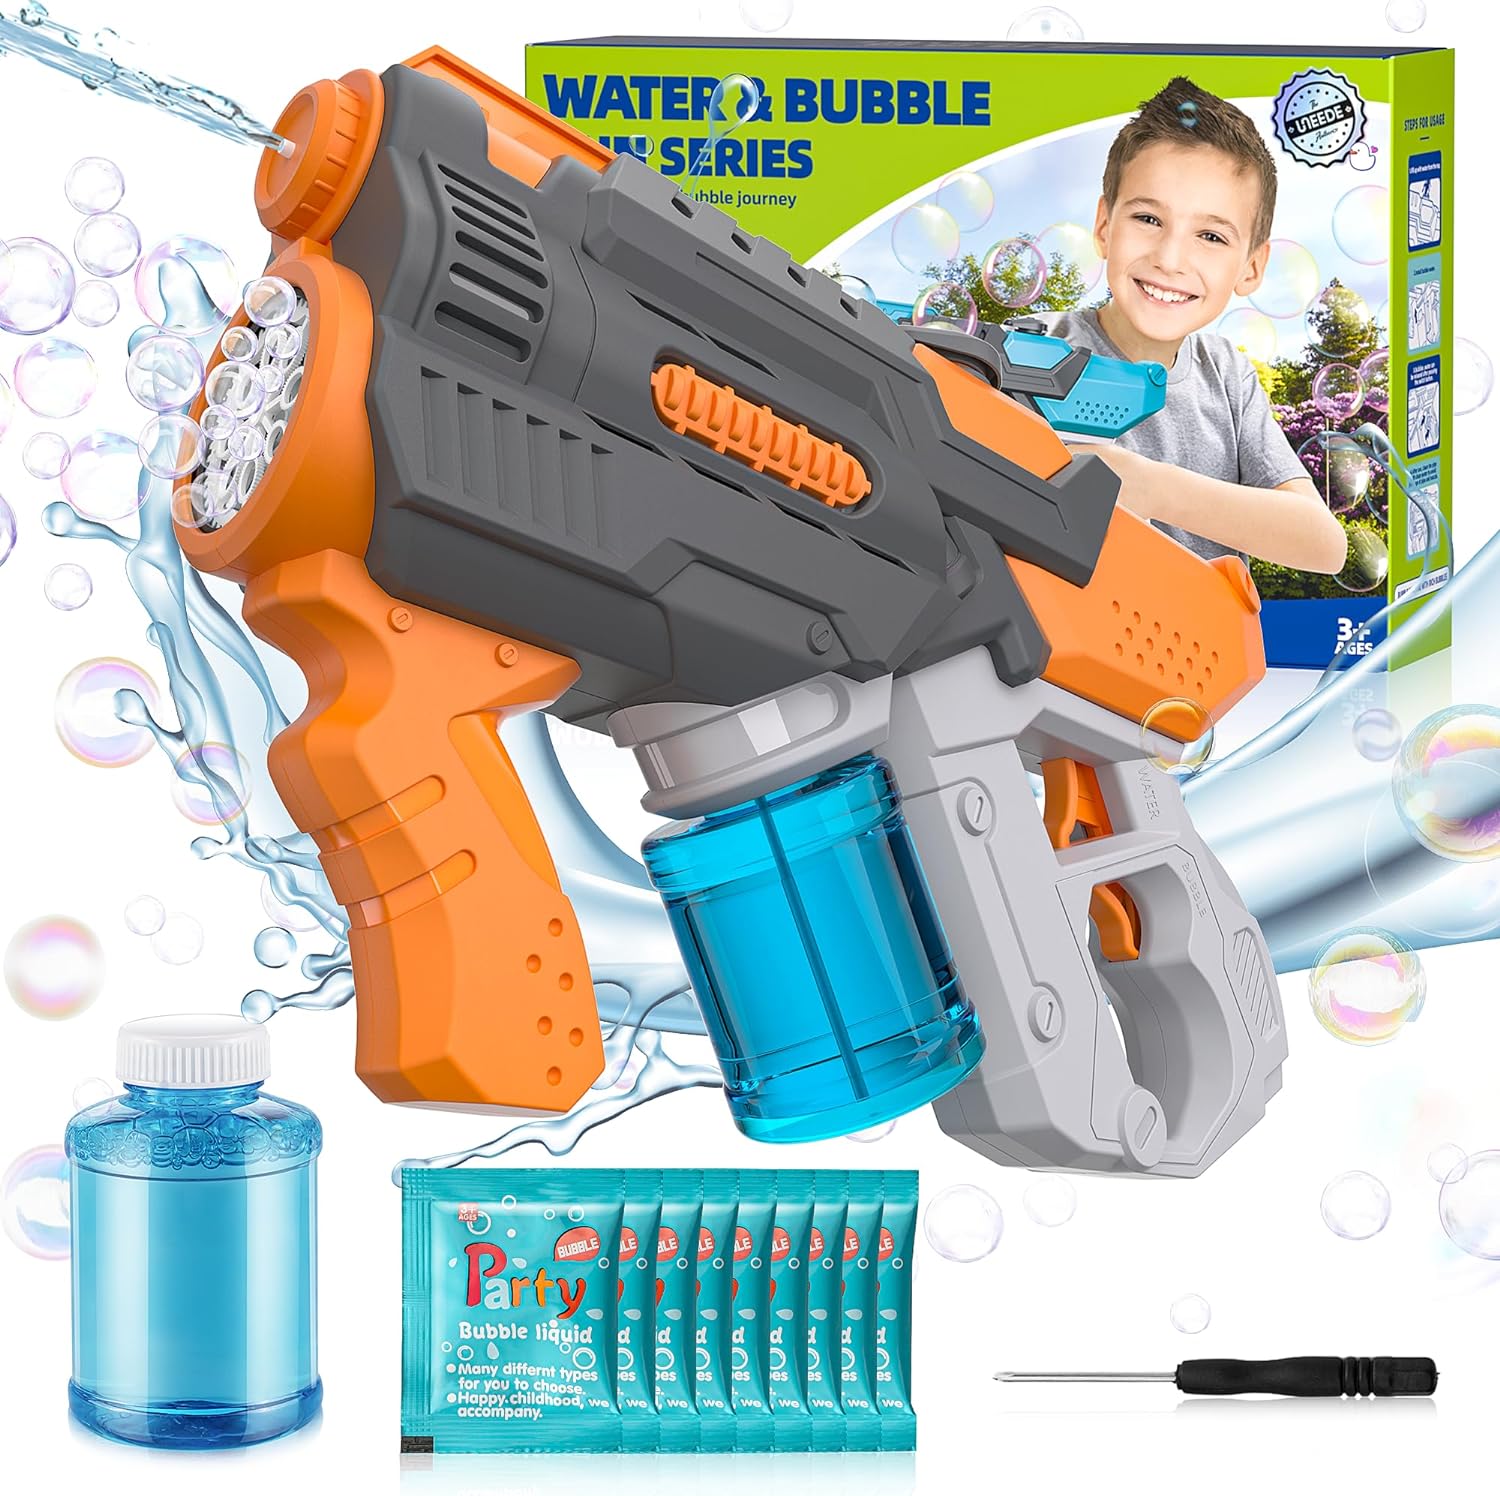 UNEEDE Electric Water Gun & Bubble Machine 2 in 1 Automatic Bubble Maker & Water Squirt Gun with 32FT Range for Summer Outdoor Pool Beach Ideals Gift for Adult for Kids Ages 4-8 8-12